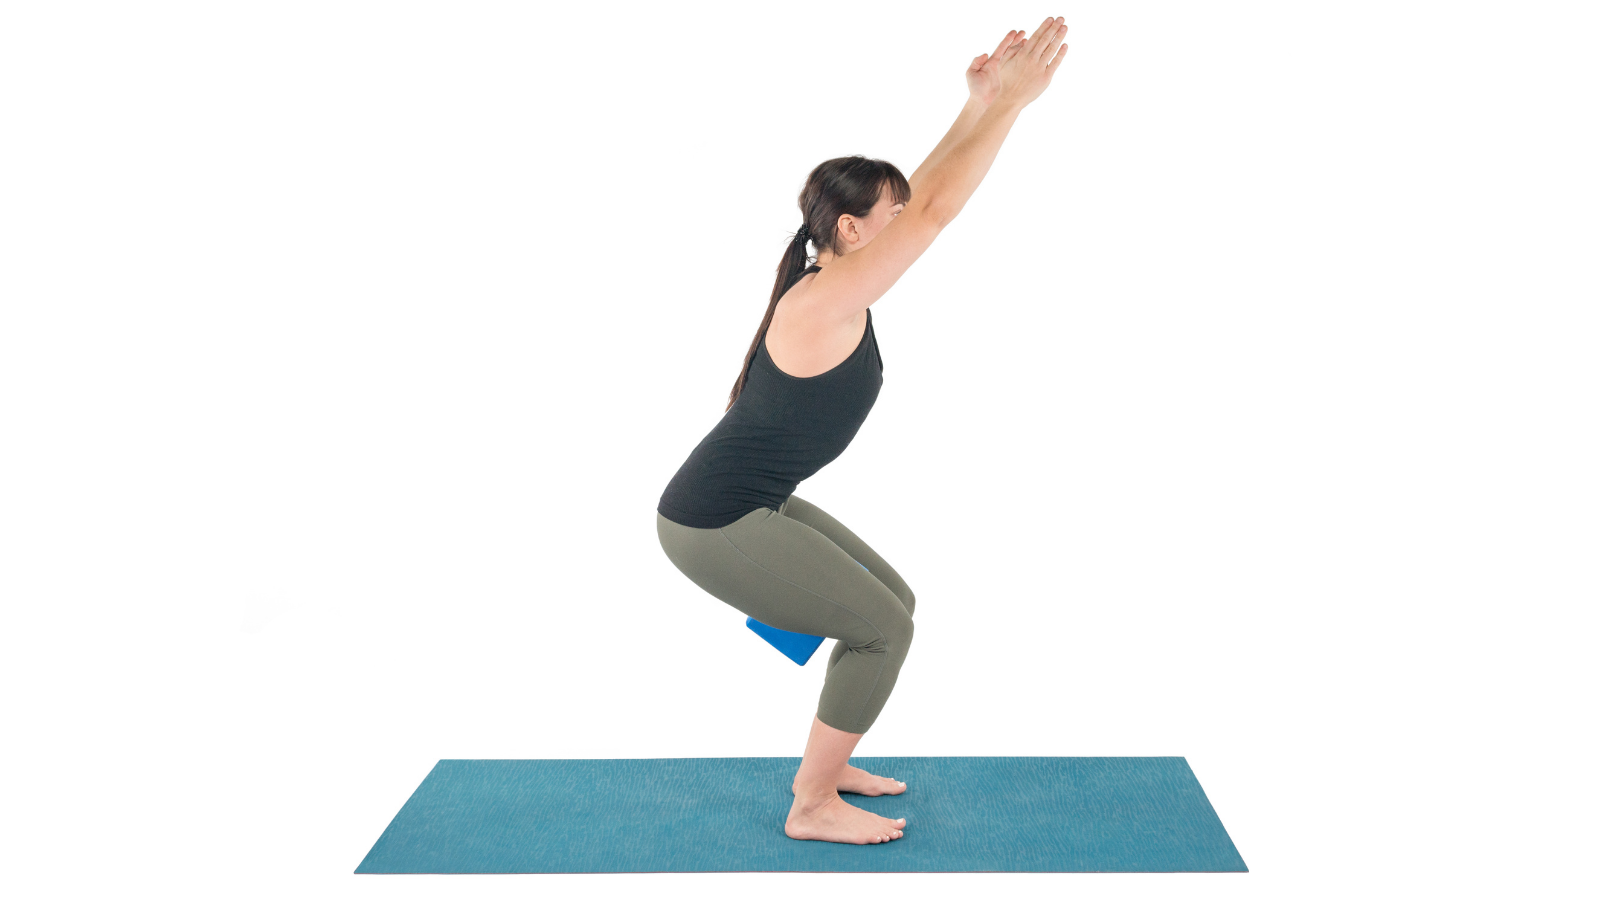 Chair Pose or Utkatasana with a block between the legs for greater strength and stability and pelvic floor health